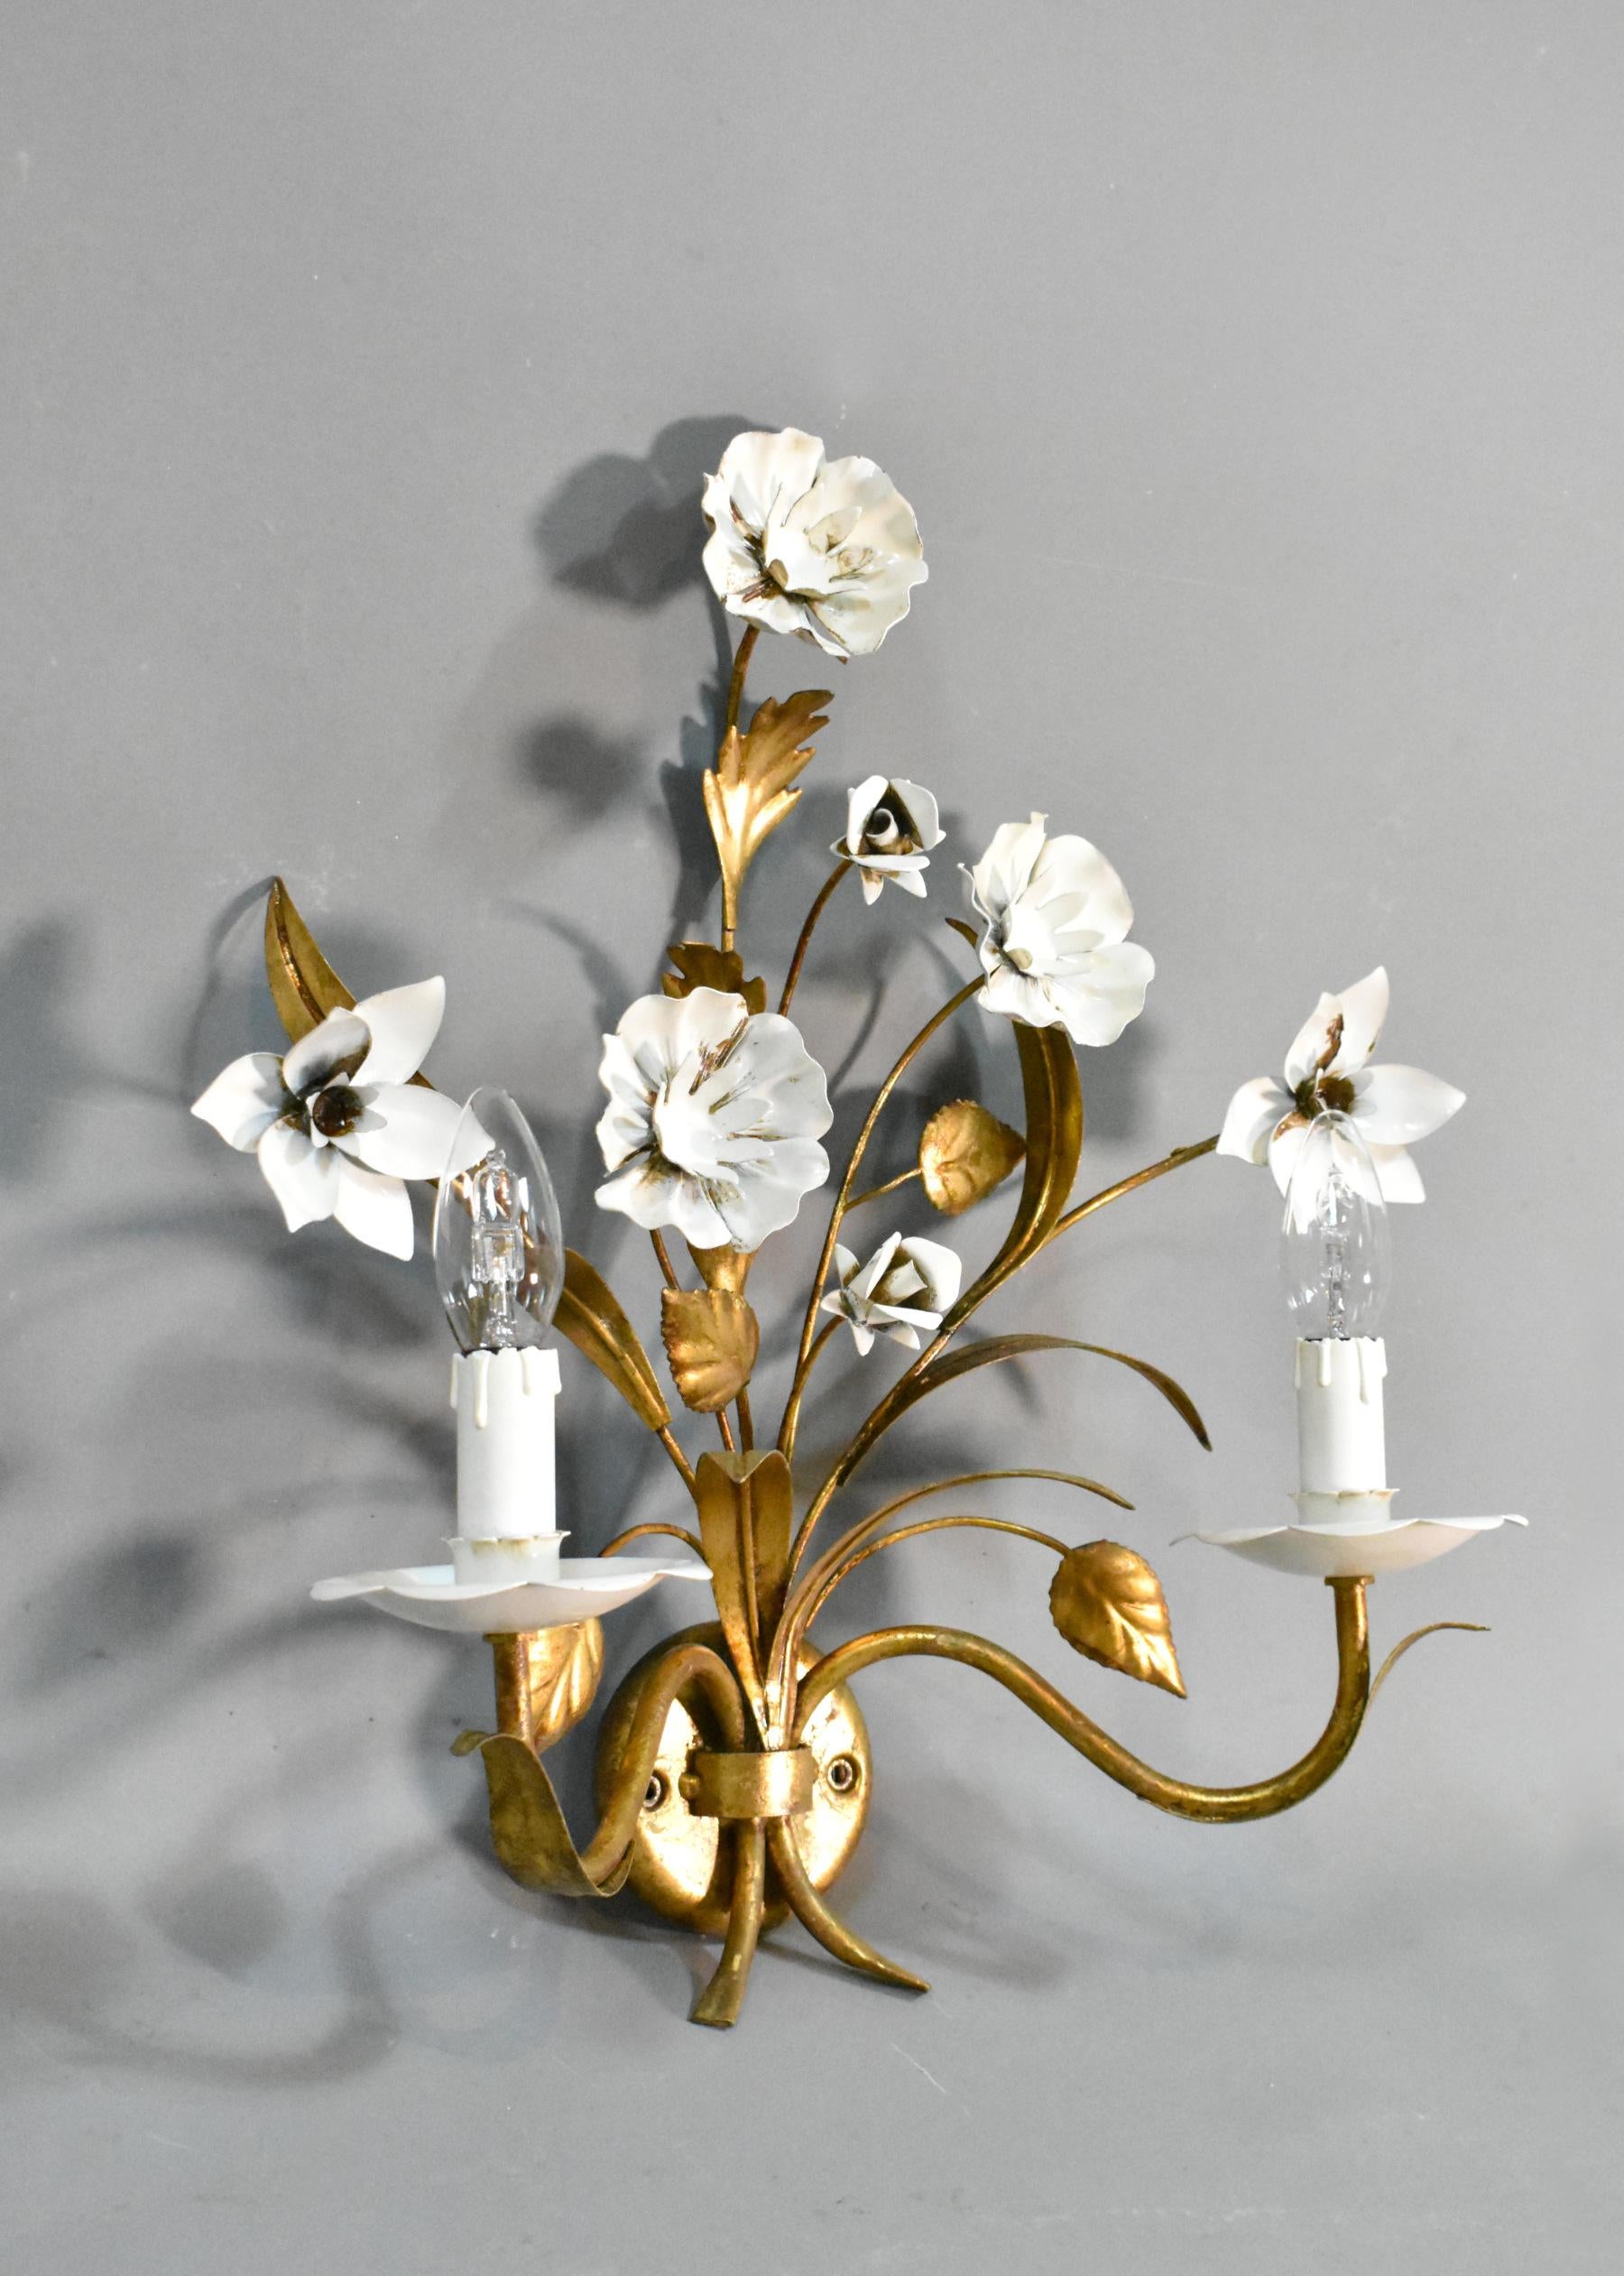 A pretty Hollywood Regency mid-century toleware wall light / sconce featuring a variety of white flowers and gilded foliage.

This two-light wall sconce has elegant stems and flowers extending out from the central base.

This light has been tested